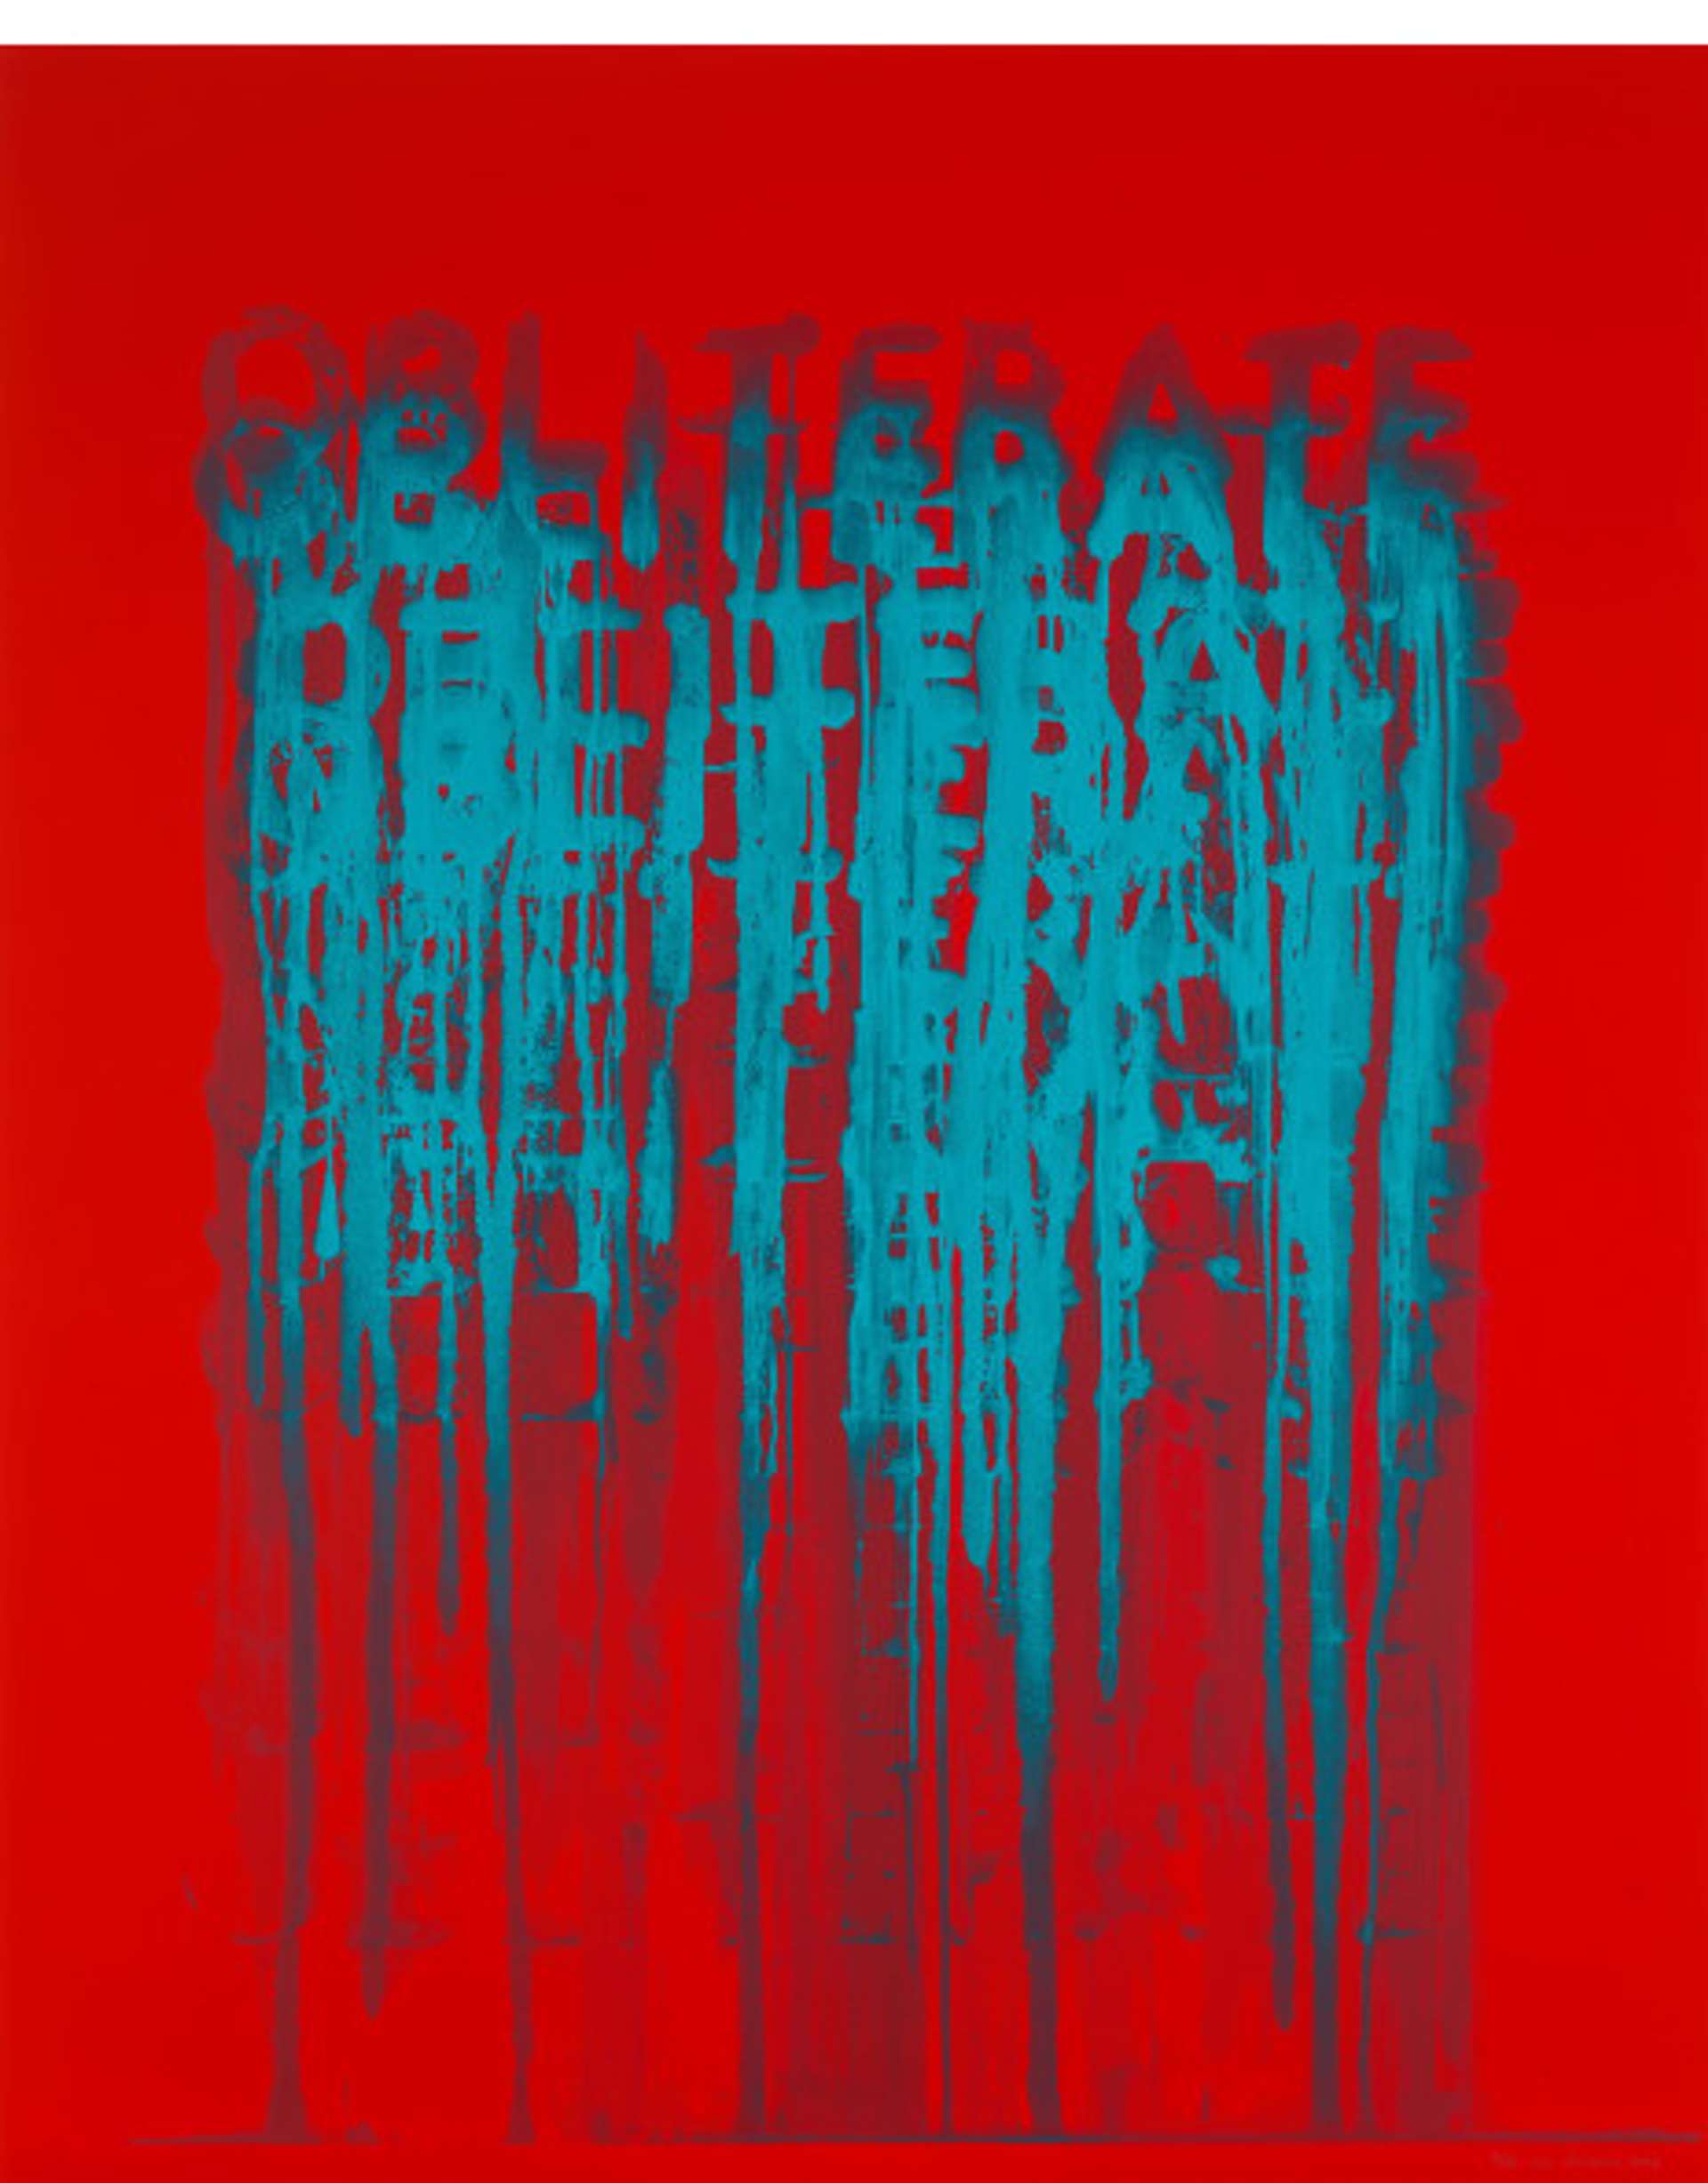 An abstract artwork featuring the word "obliterate" repeatedly stacked in turquoise blue, creating a dynamic effect as the colors blend and bleed into each other. The vibrant red background adds contrast and intensity to the composition.An abstract artwork featuring the word "obliterate" repeatedly stacked in turquoise blue, creating a dynamic effect as the colors blend and bleed into each other. The vibrant red background adds contrast and intensity to the composition.